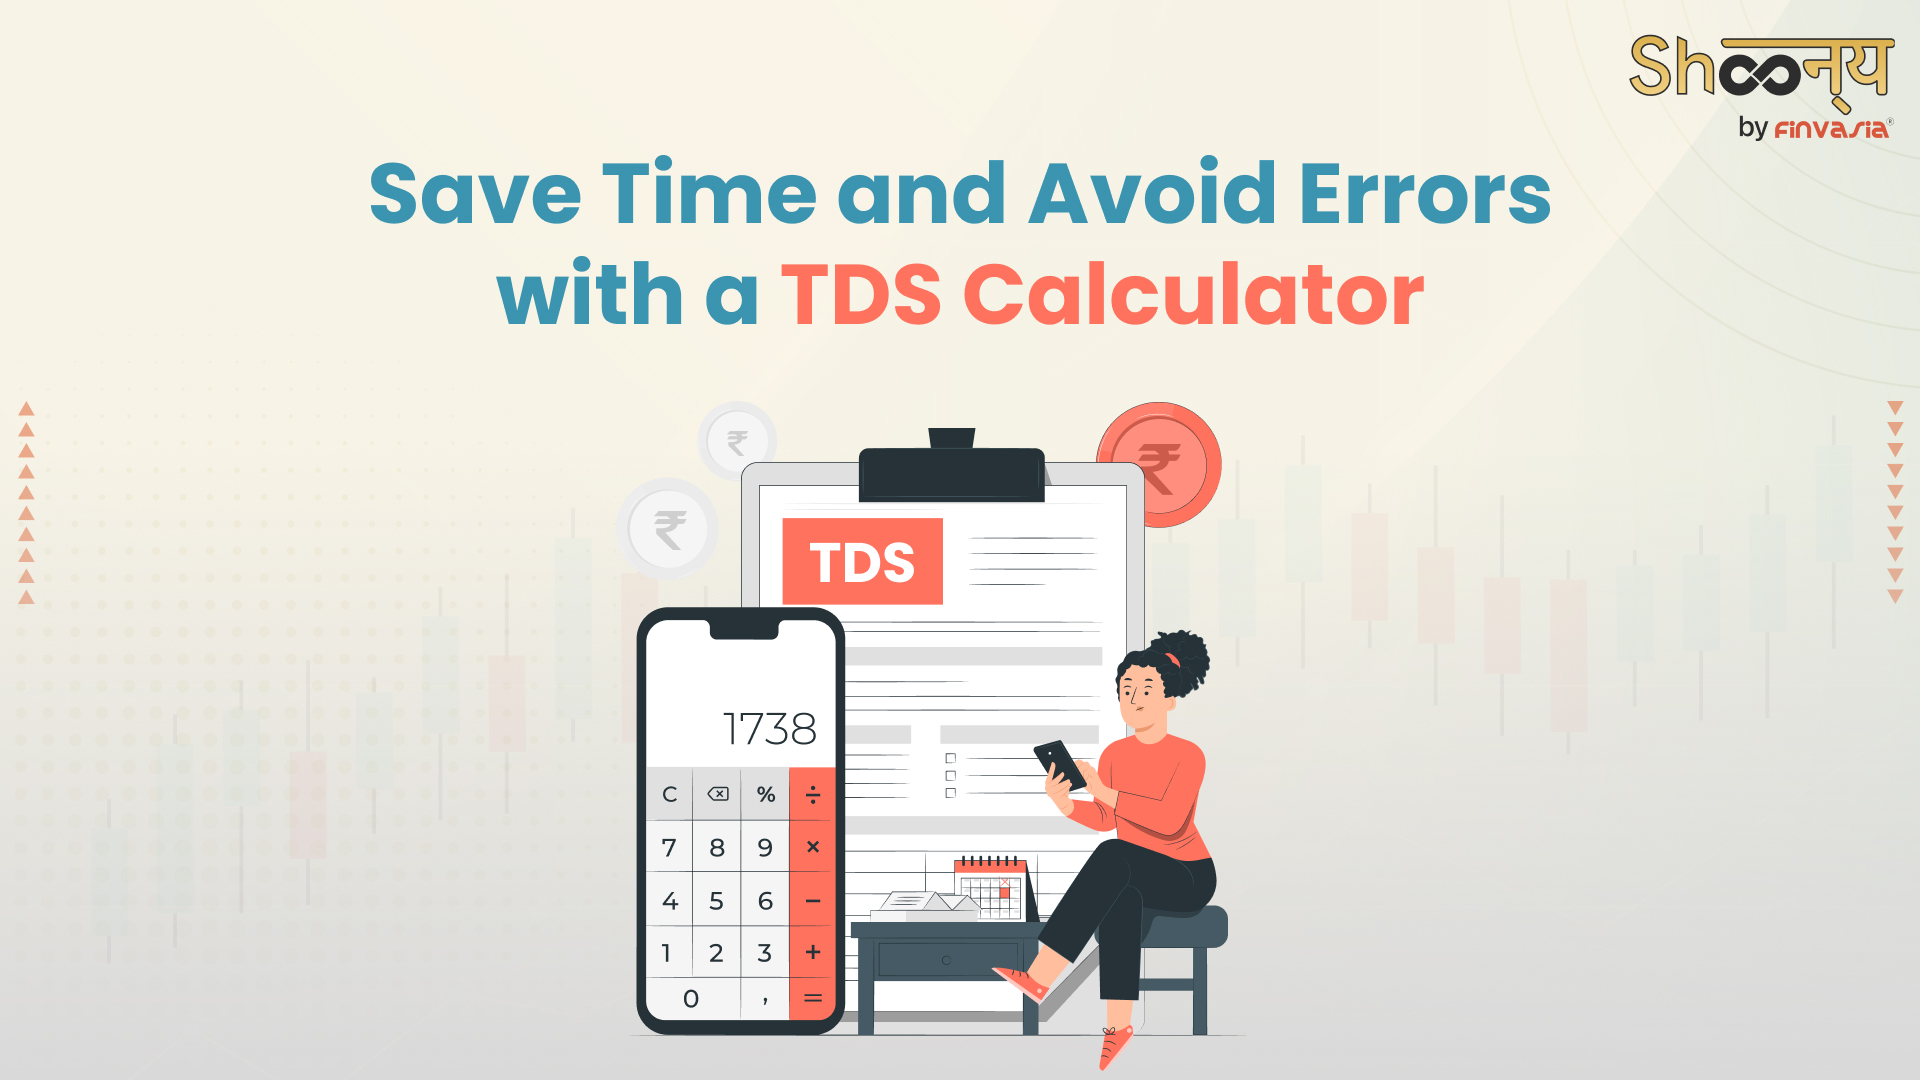 TDS Calculator| Features, Working and Advantages